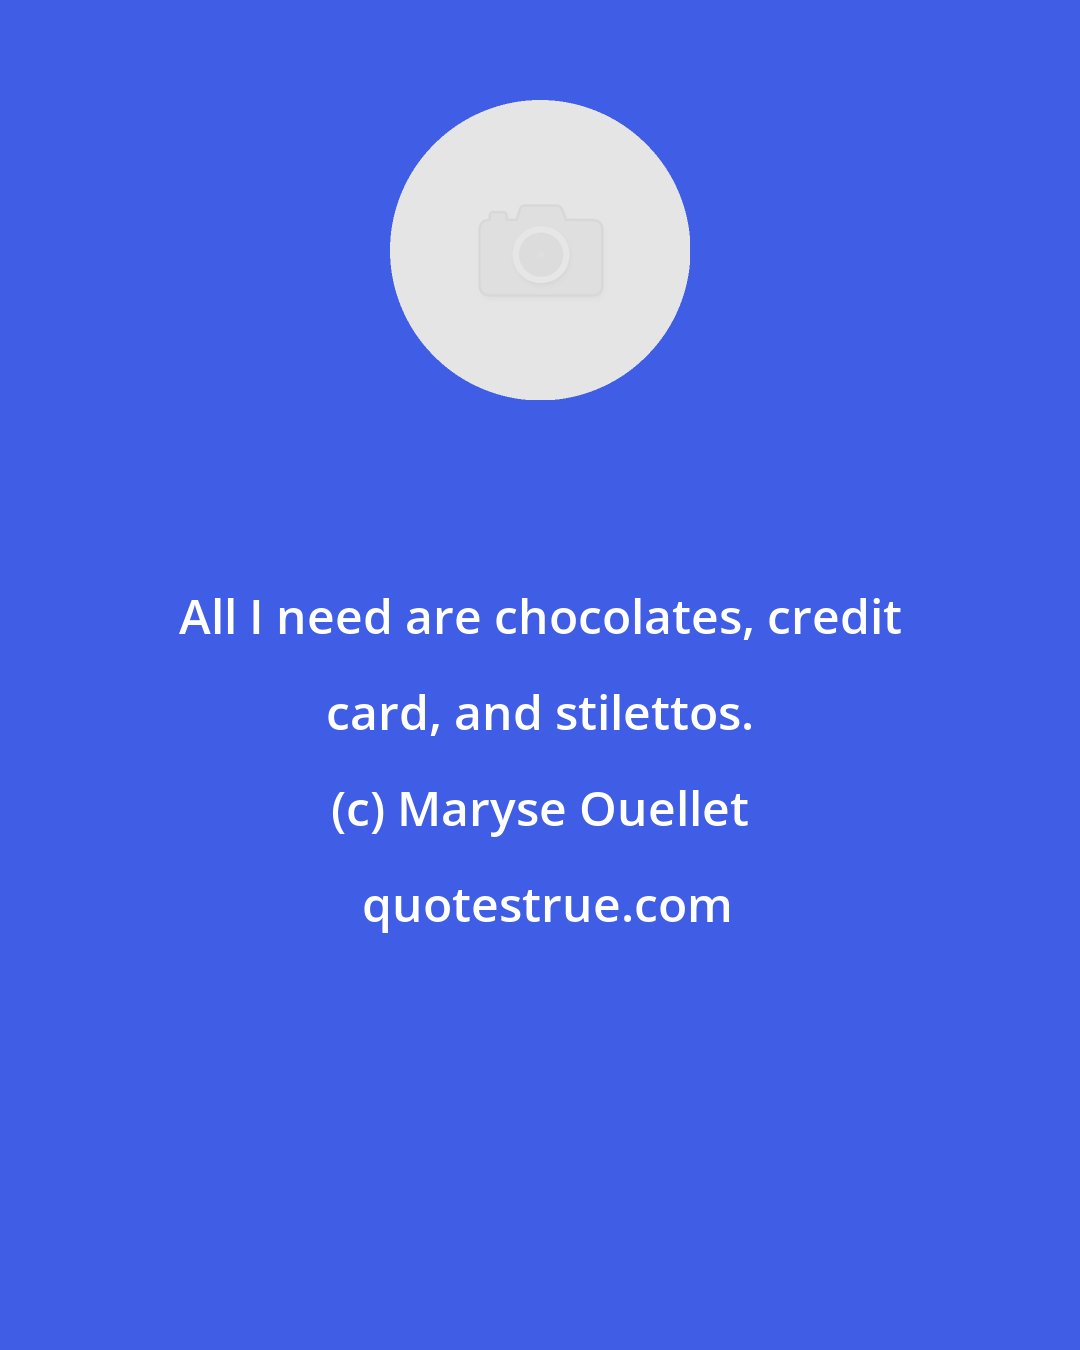 Maryse Ouellet: All I need are chocolates, credit card, and stilettos.